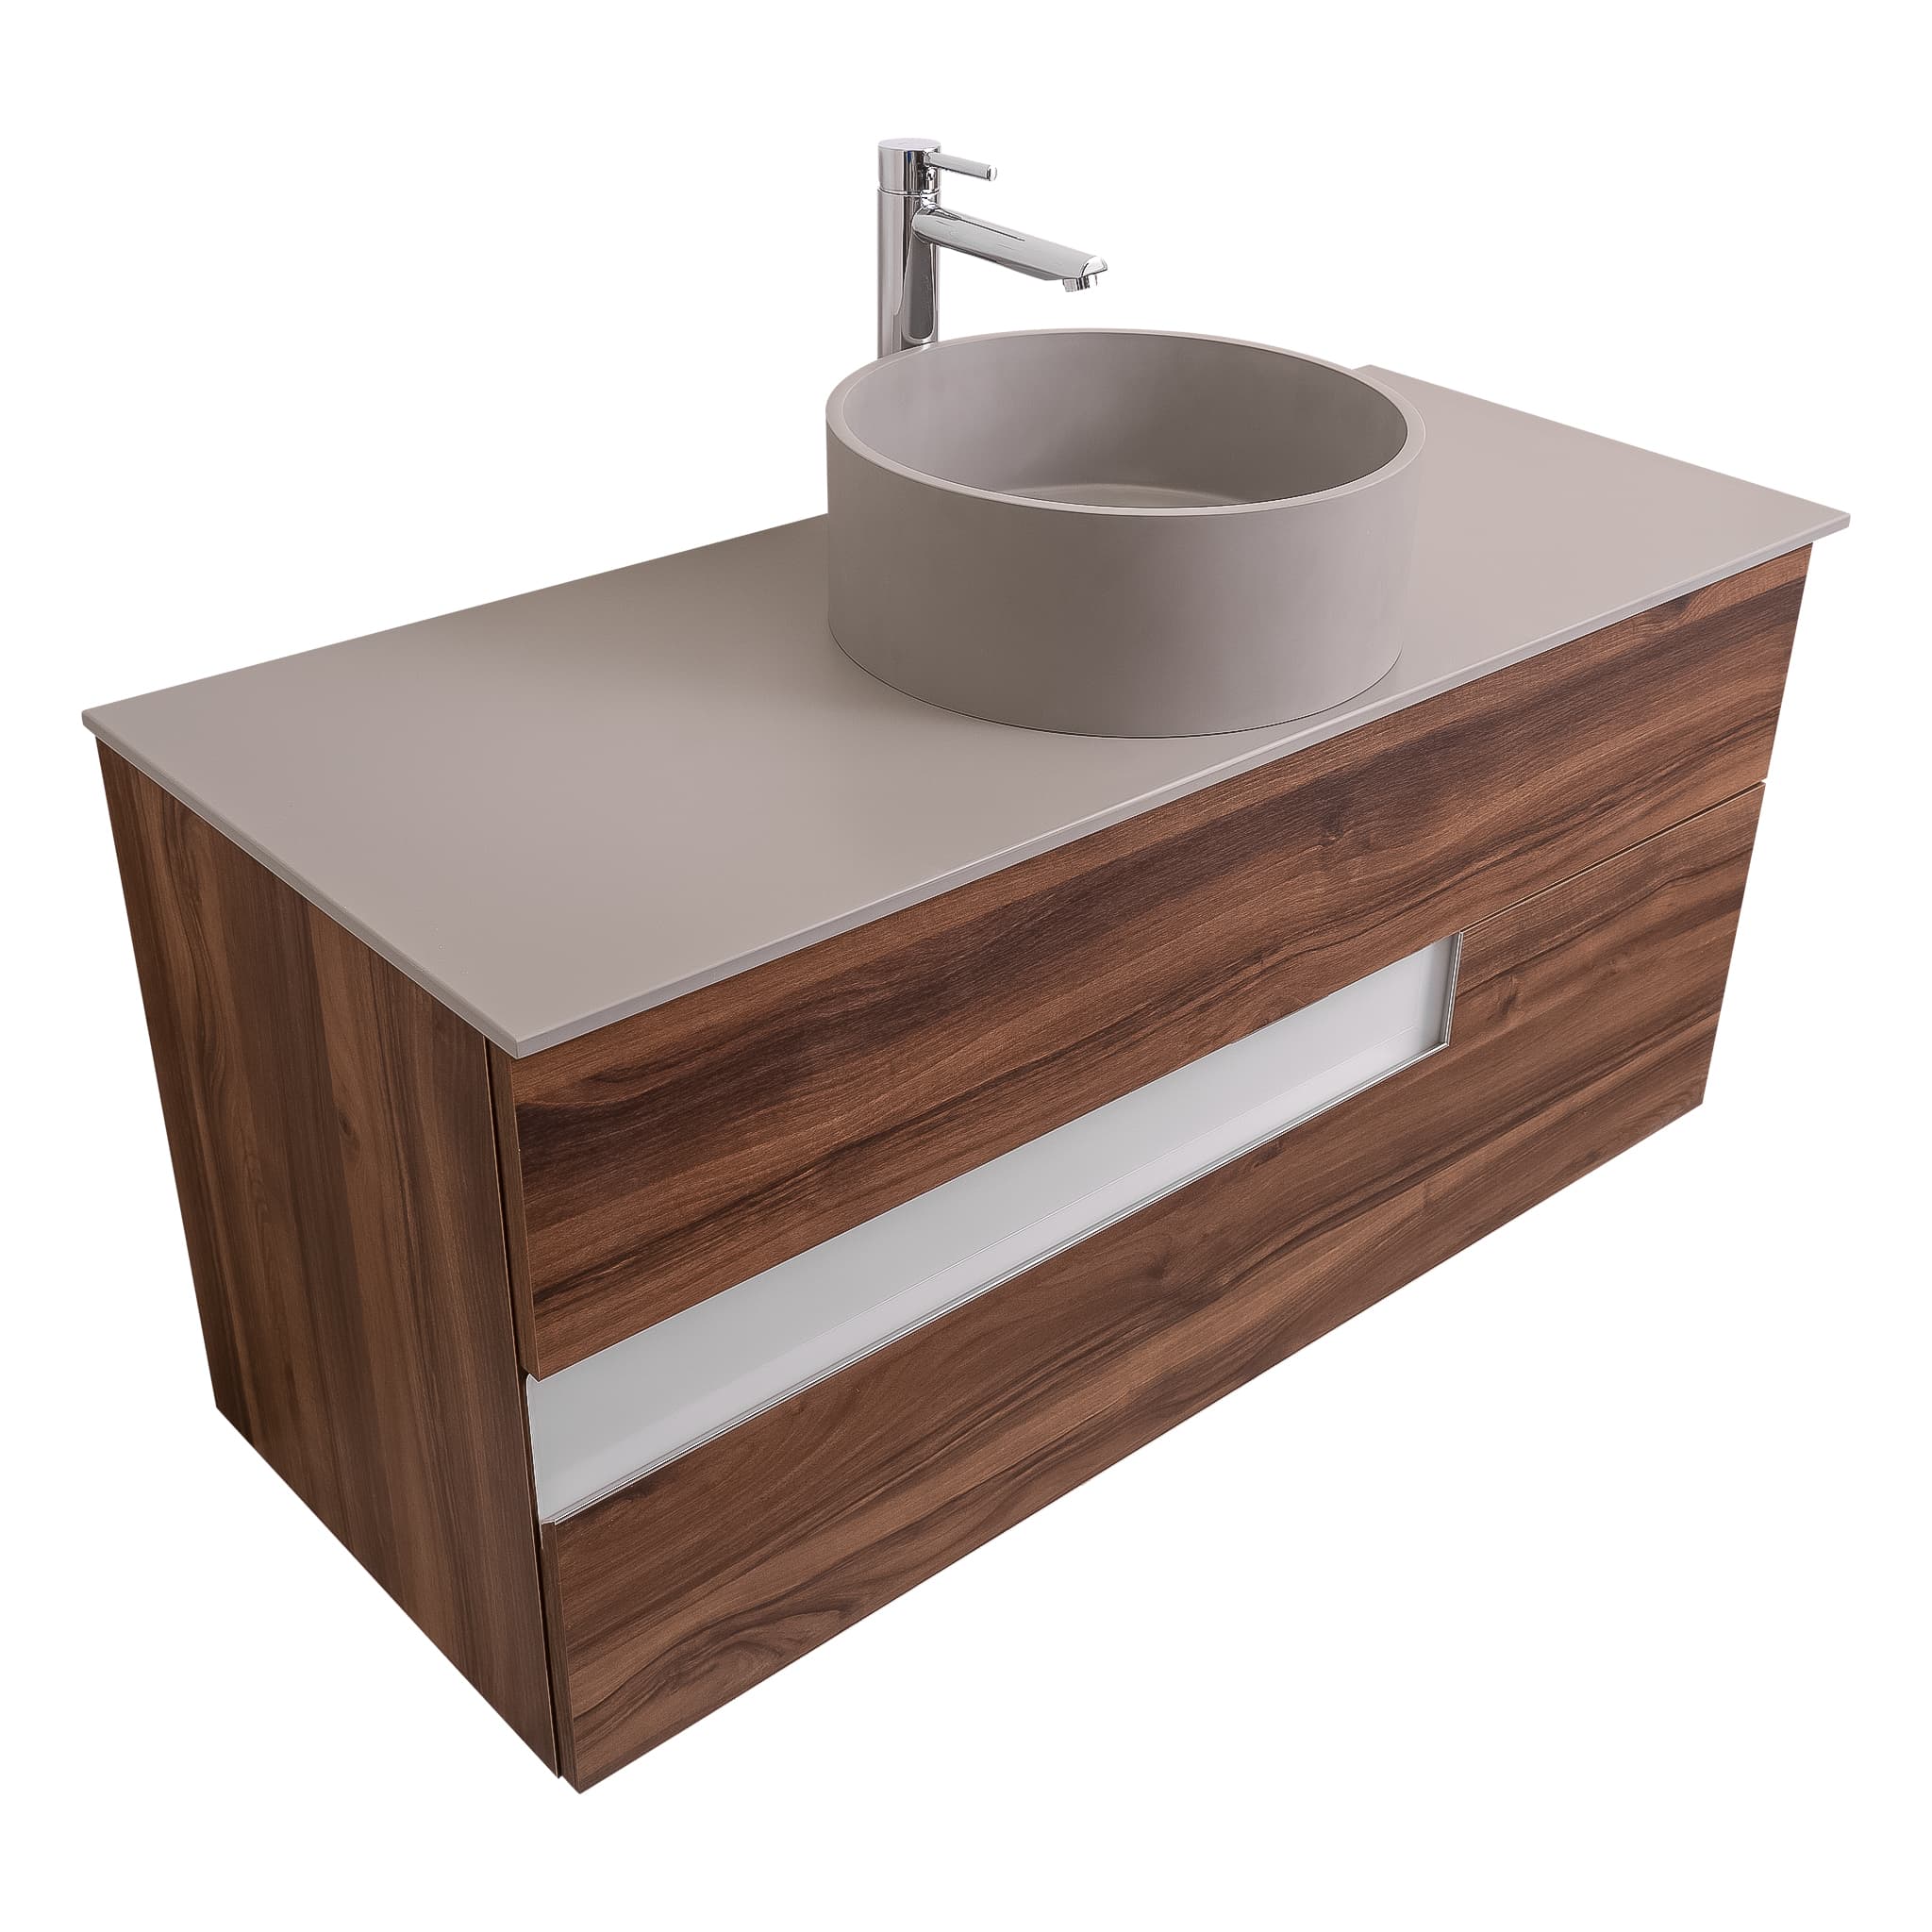 Vision 47.5 Valenti Medium Brown Wood Cabinet, Solid Surface Flat Grey Counter And Round Solid Surface Grey Basin 1386, Wall Mounted Modern Vanity Set